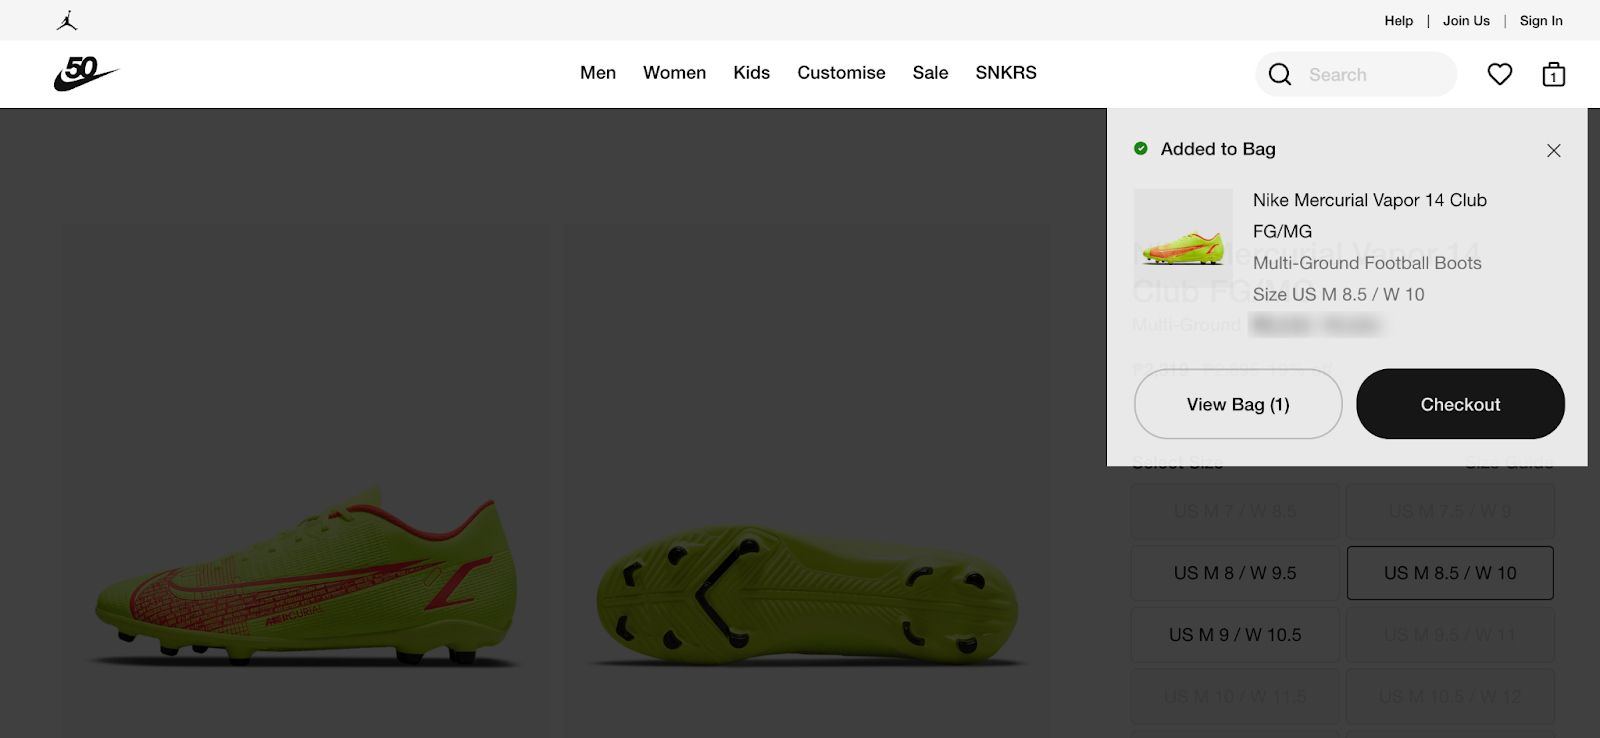 Nike’s online store has prominent checkout buttons and a distraction-free header and footer.